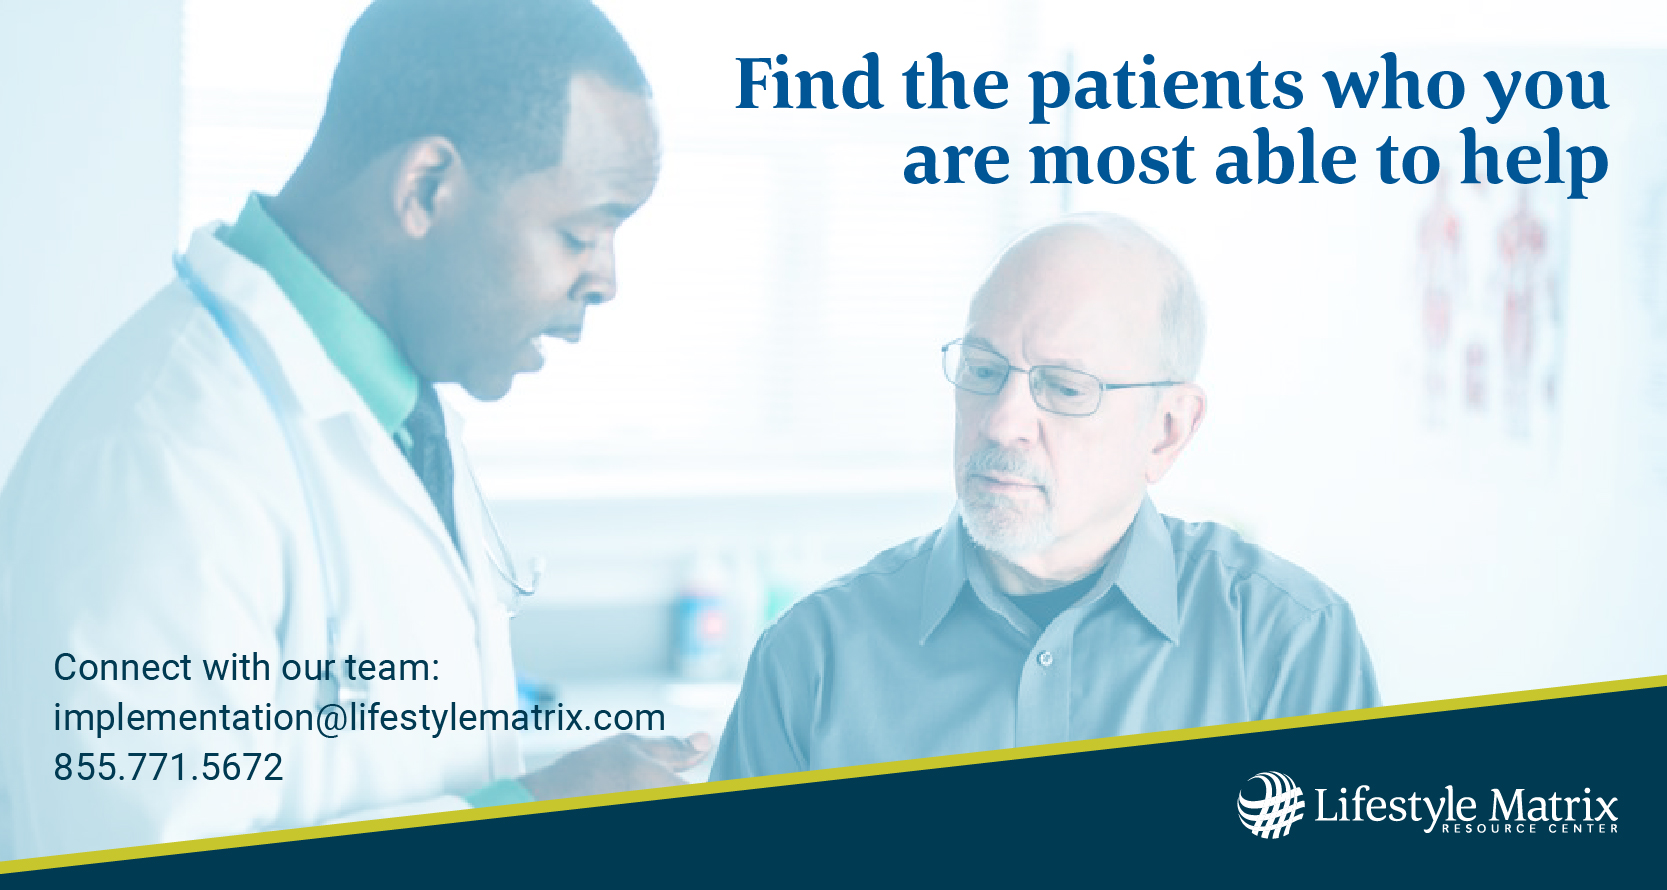 Helping physicians find patients who they can best help